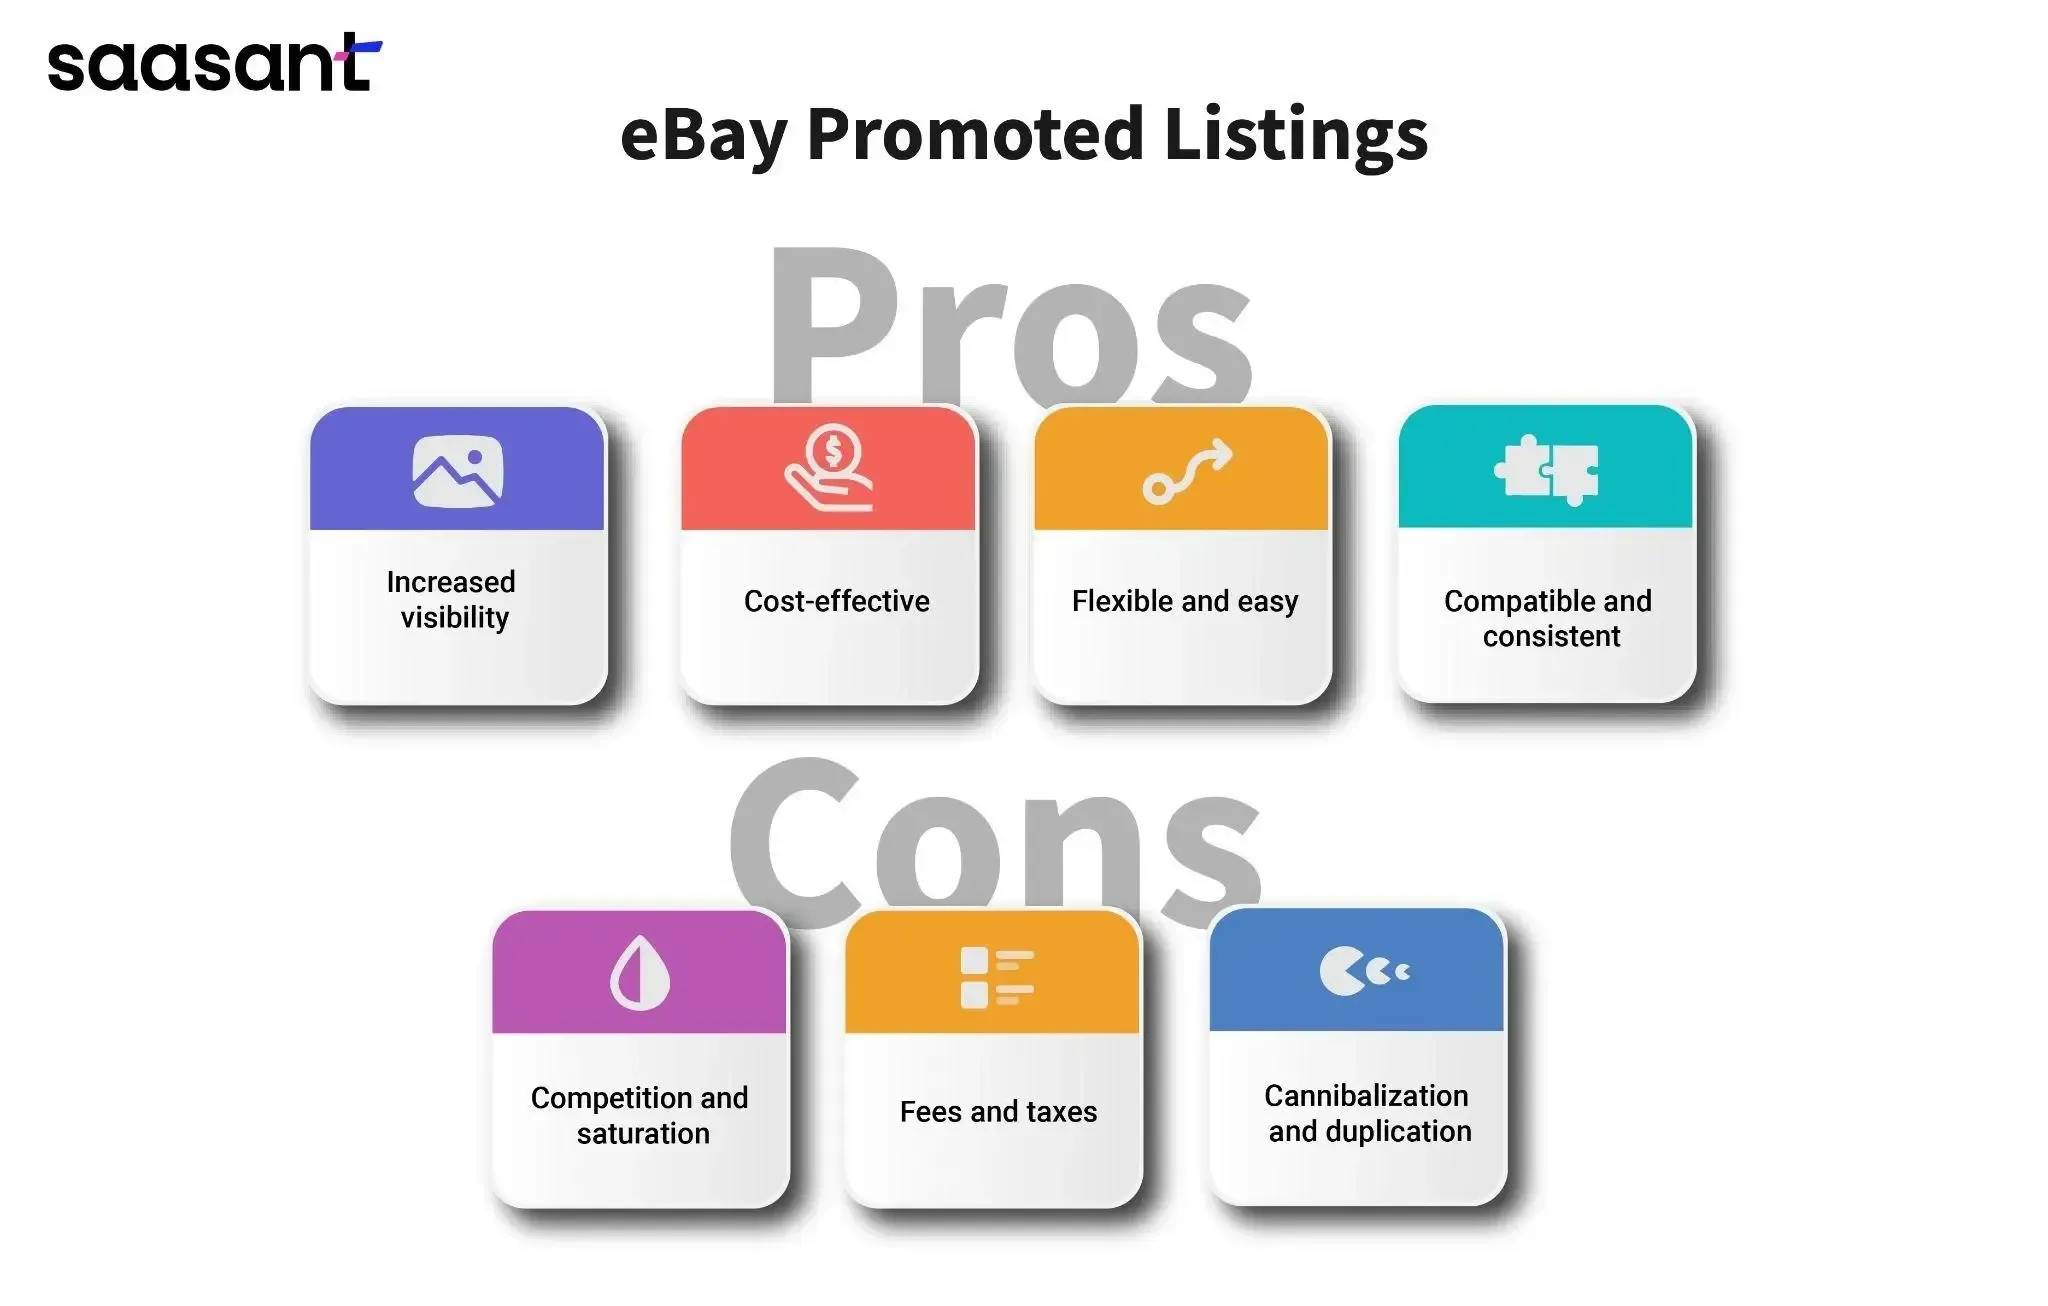 eBay Promoted Listings - Pros and Cons